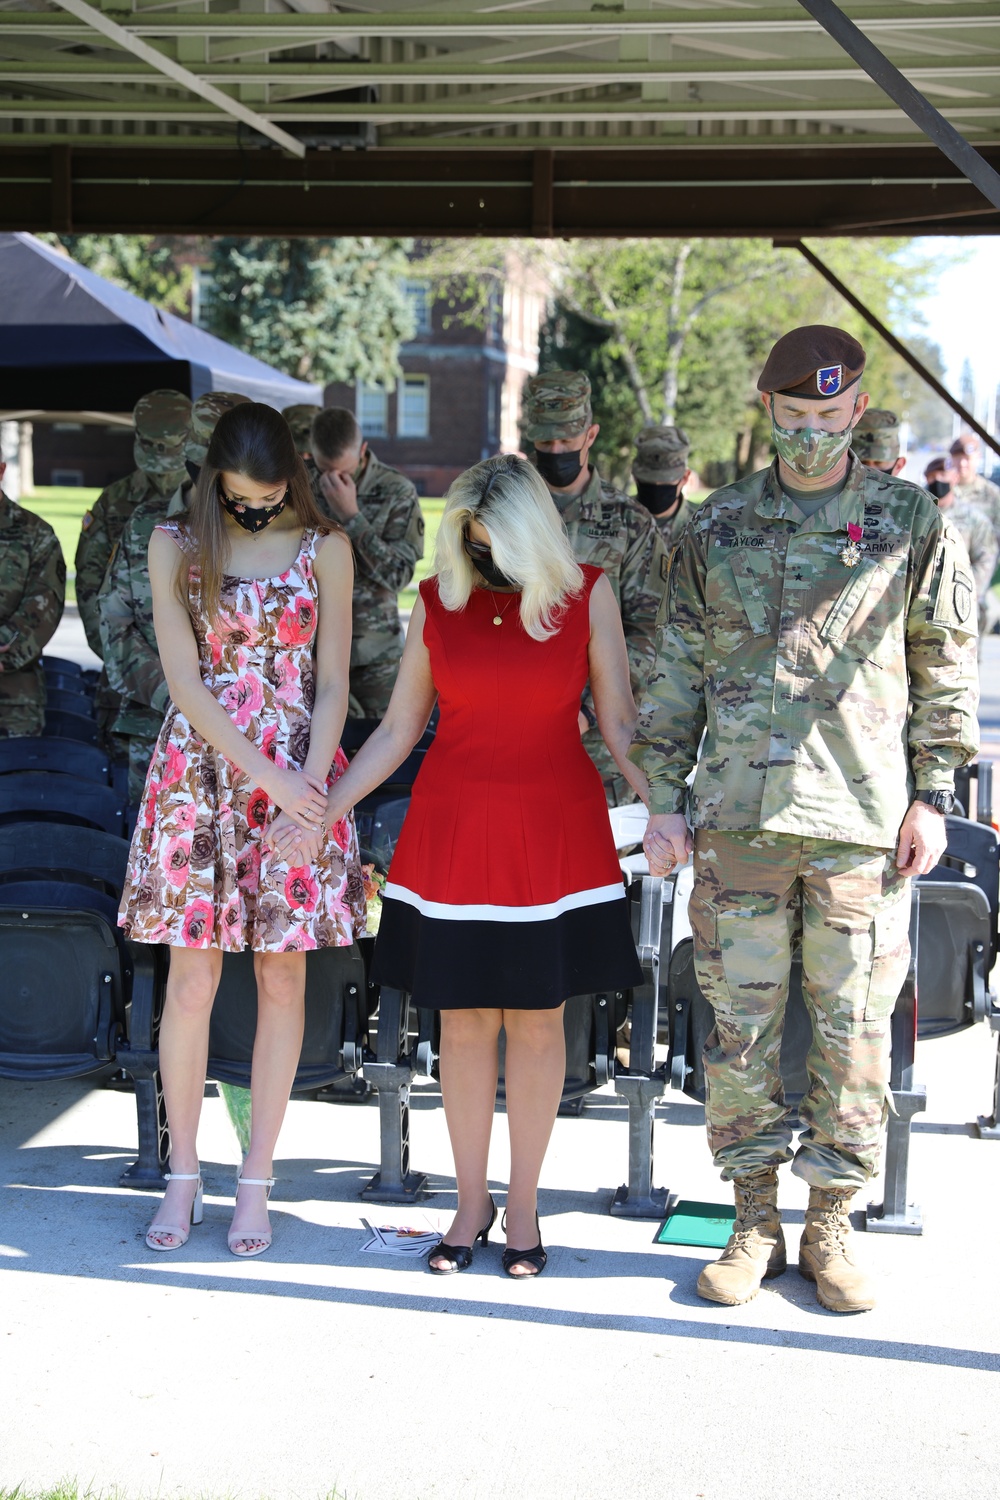 Taylor Family pauses in prayer during Relinquishment of Command Ceremony